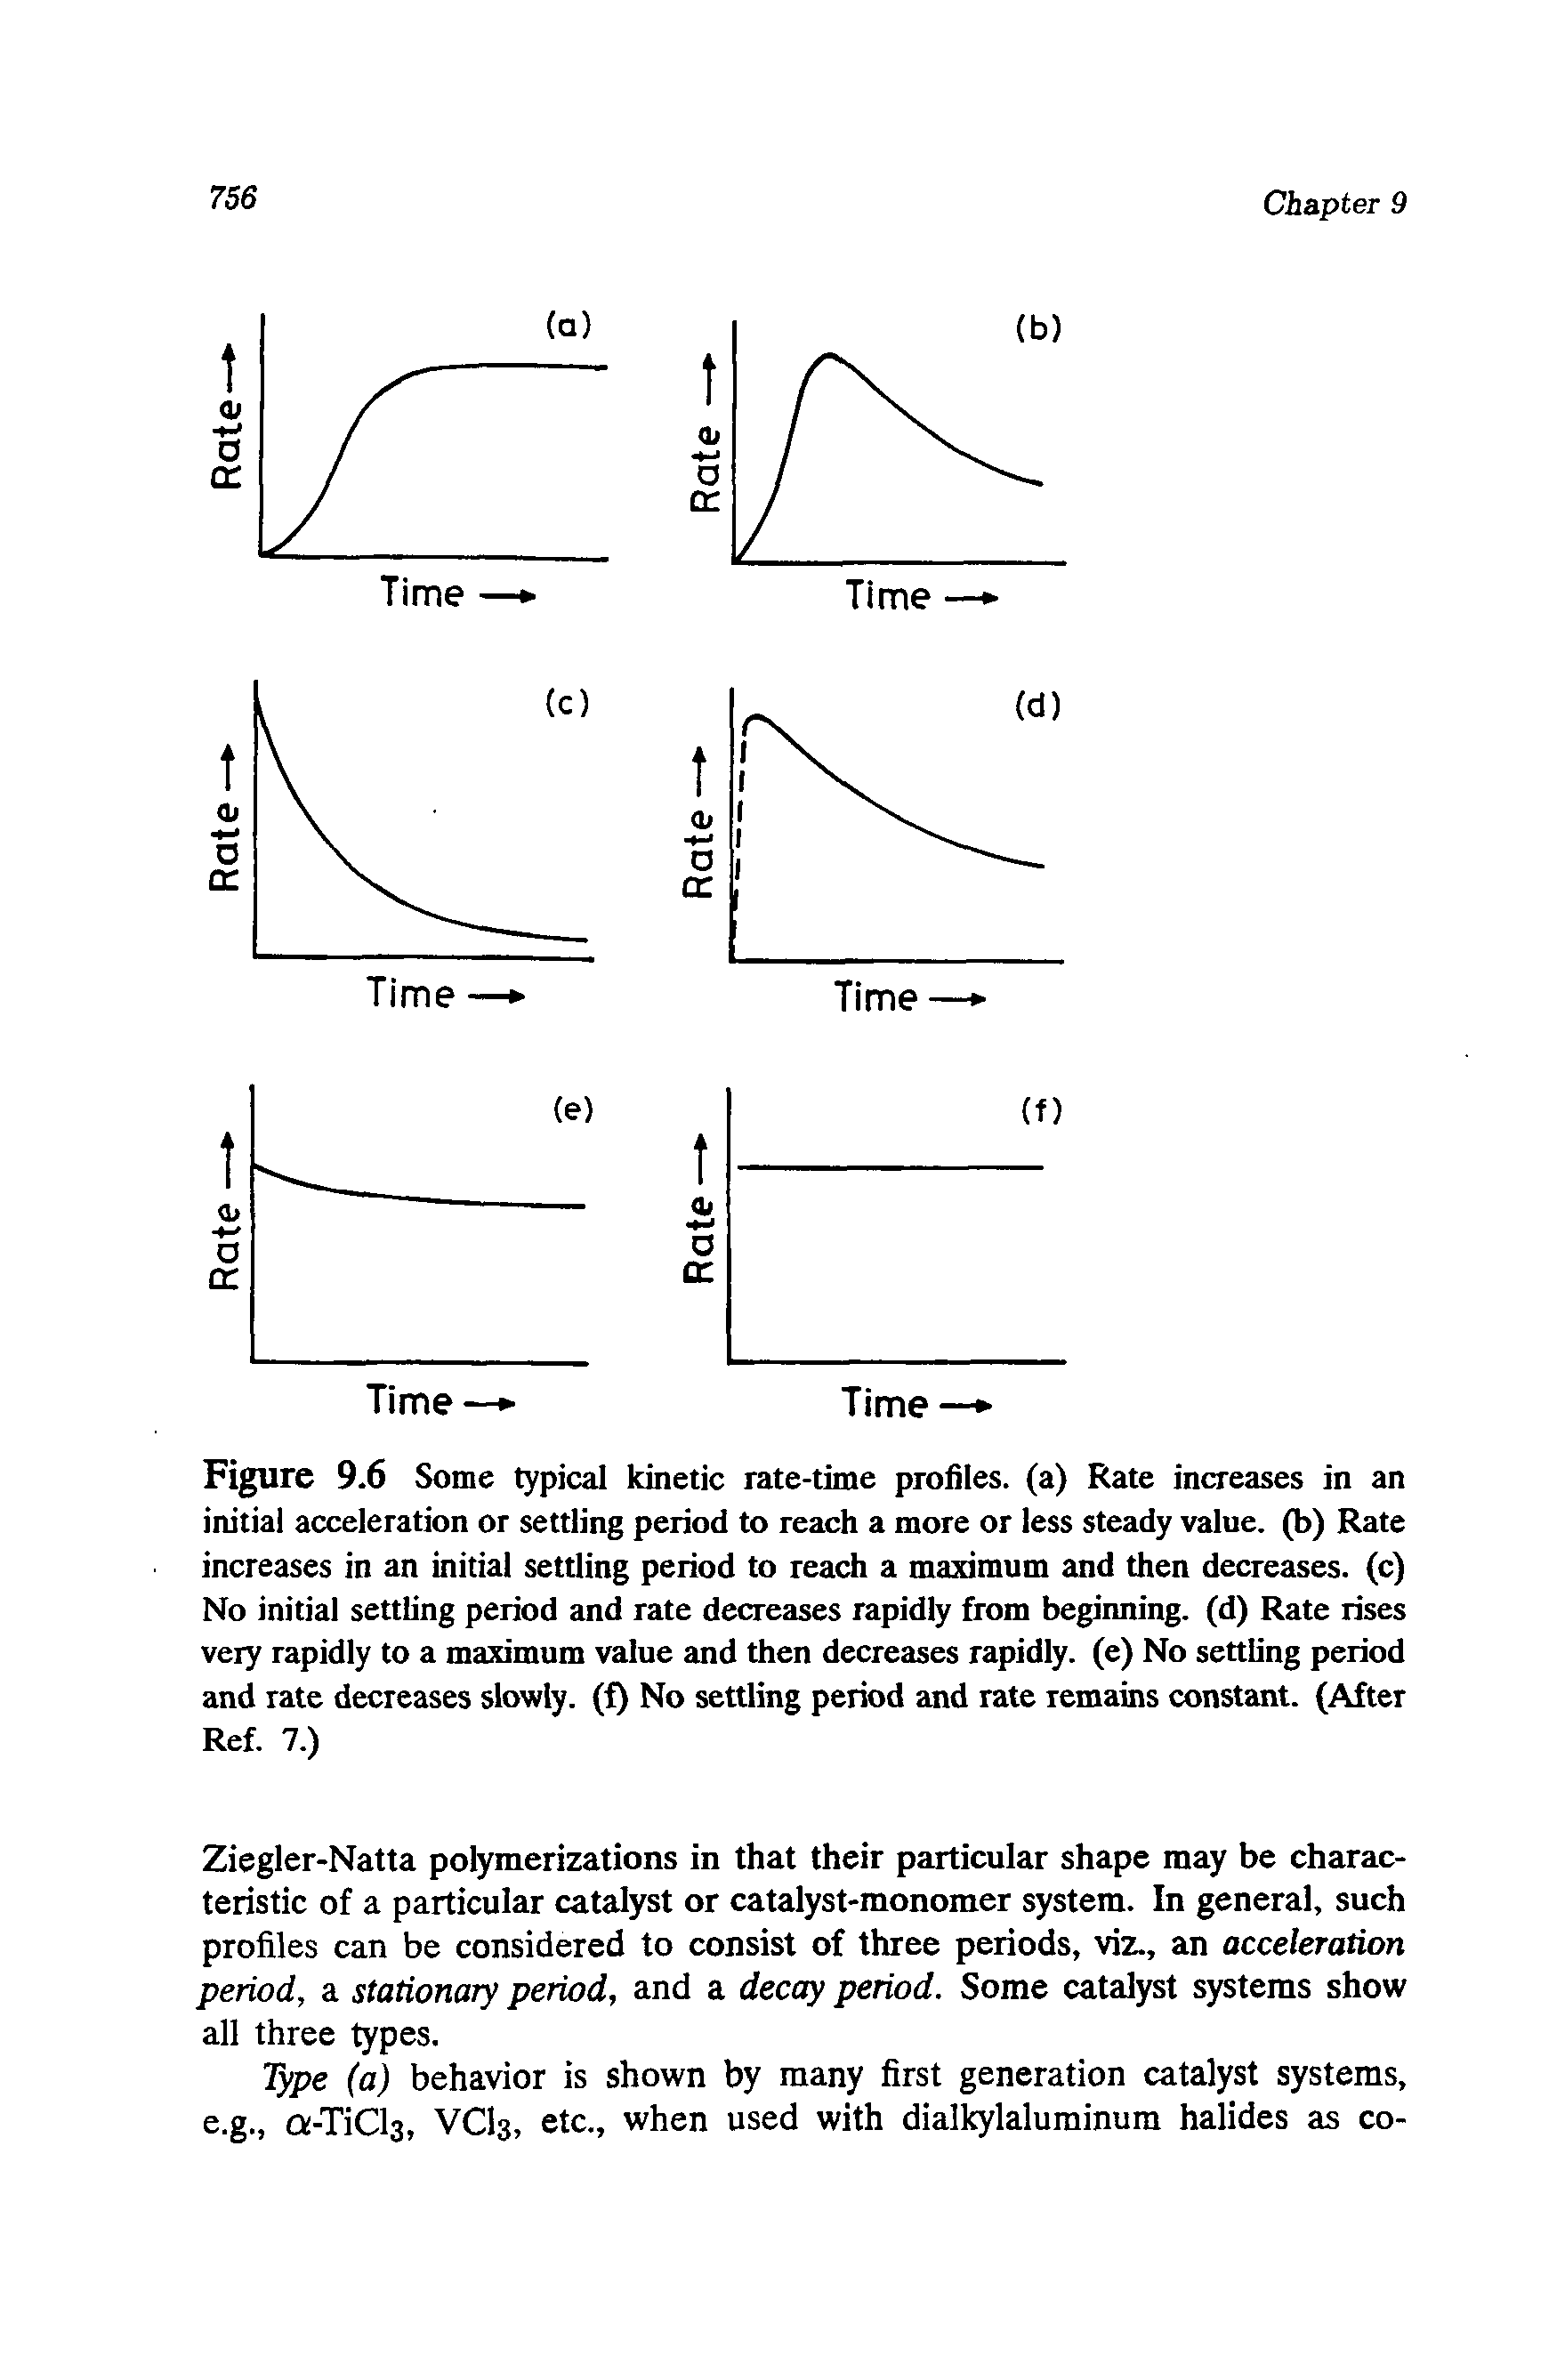 Figure 9.6 Some typical kinetic rate-time profiles, (a) Rate increases in an initial acceleration or settling period to reach a more or less steady value, (b) Rate increases in an initial settling period to reach a maximum and then decreases, (c) No initial settling period and rate decreases rapidly from beginning, (d) Rate rises very rapidly to a maximum value and then decreases rapidly, (e) No settling period and rate decreases slowly, (f) No settling period and rate remains constant. (After Ref. 7.)...